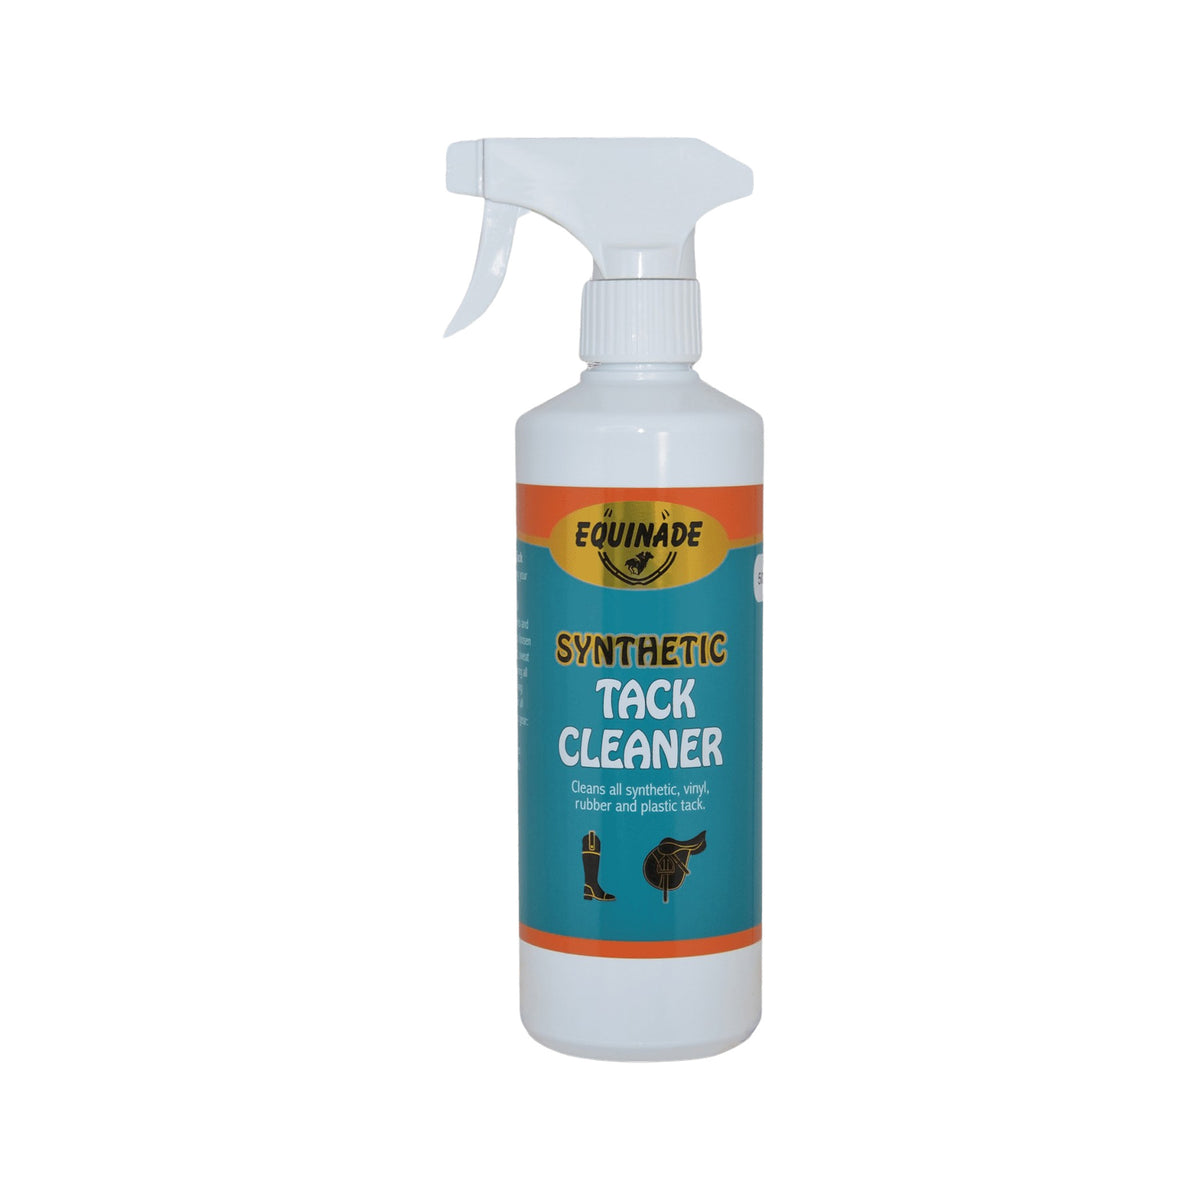 Equinade Synthetic Tack Cleaner